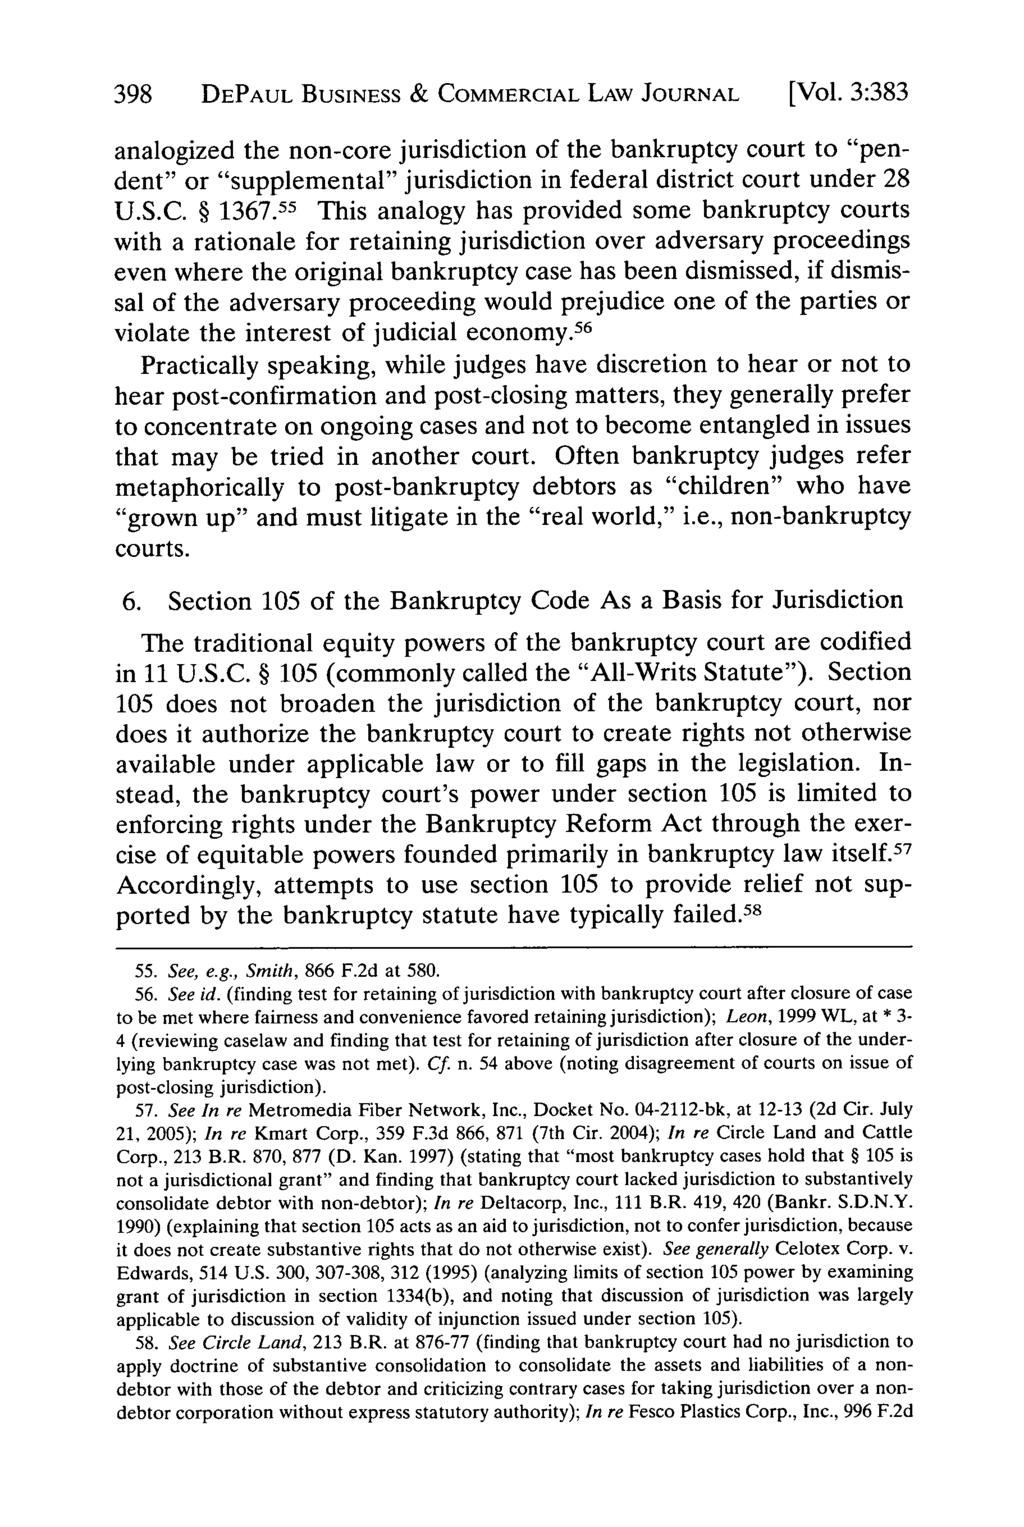 398 DEPAUL BUSINESS & COMMERCIAL LAW JOURNAL [Vol. 3:383 analogized the non-core jurisdiction of the bankruptcy court to "pendent" or "supplemental" jurisdiction in federal district court under 28 U.